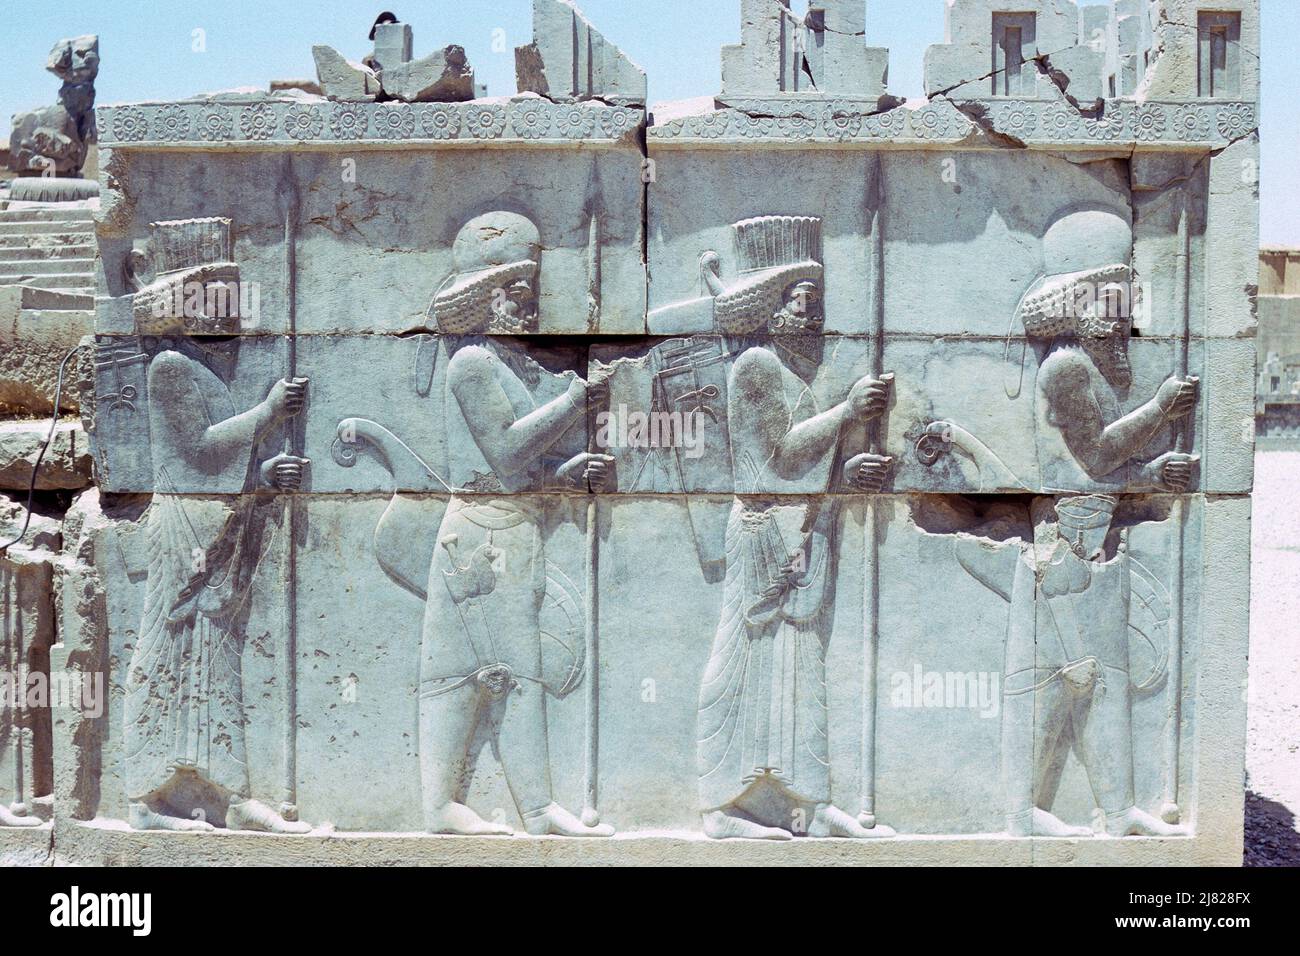 Persepolis, Iran - wall relief showing Persian guards on main stairway of the Council Hall located in the ruins of the ancient city of Persepolis, ceremonial capital of the Achaemenid Empire, in Fars Province, Iran. Archive image taken in 1976 Stock Photo